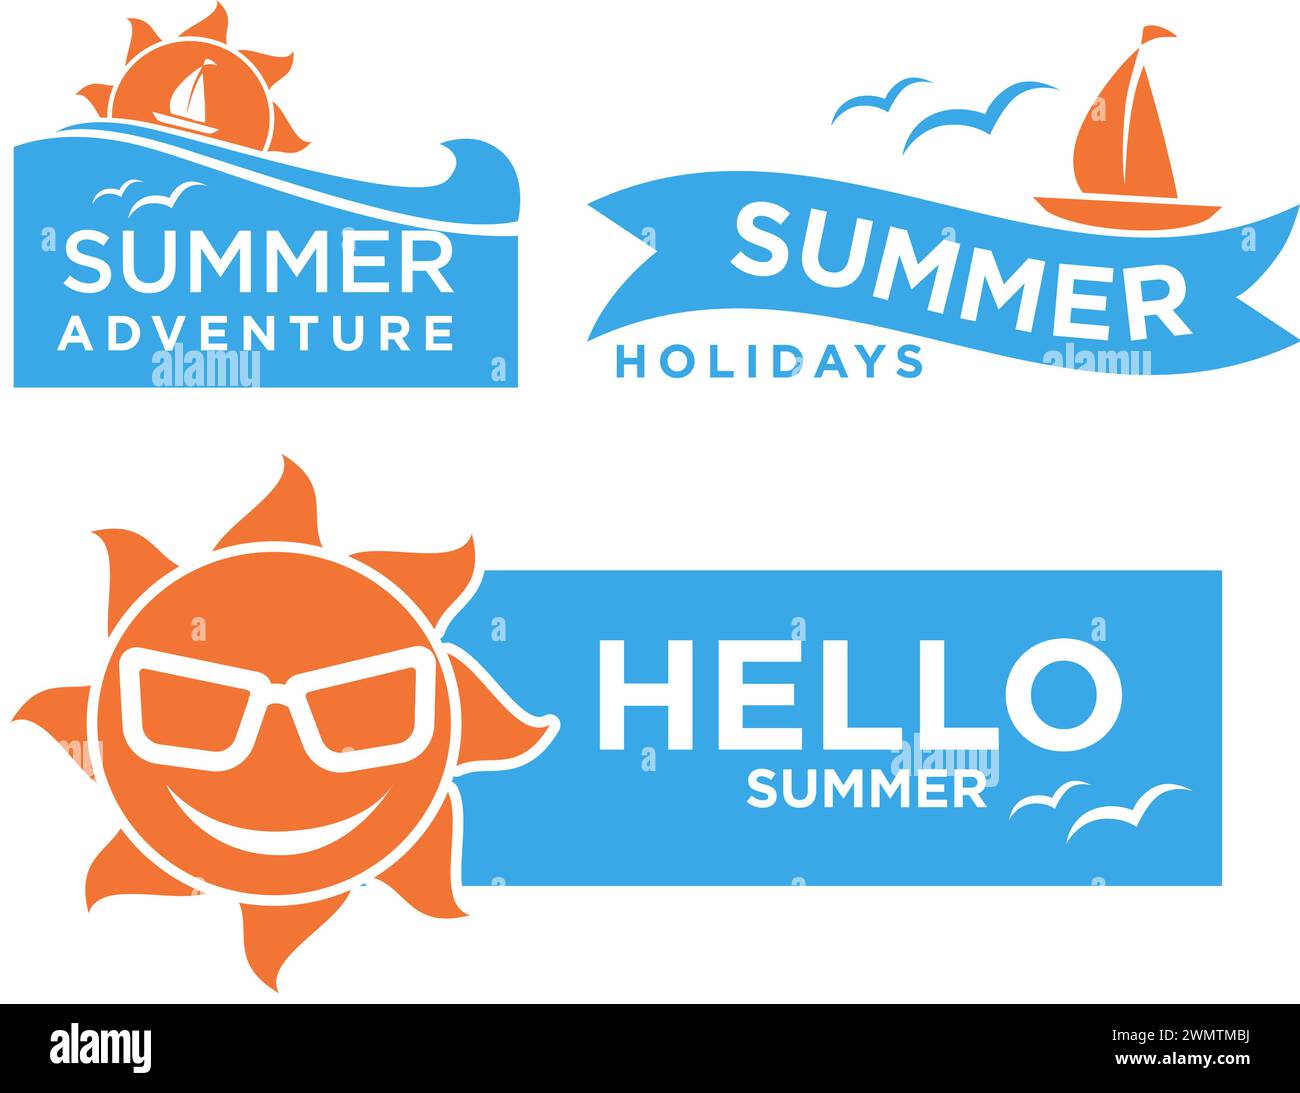 Summer adventure, holidays and fun stickers vector Stock Vector